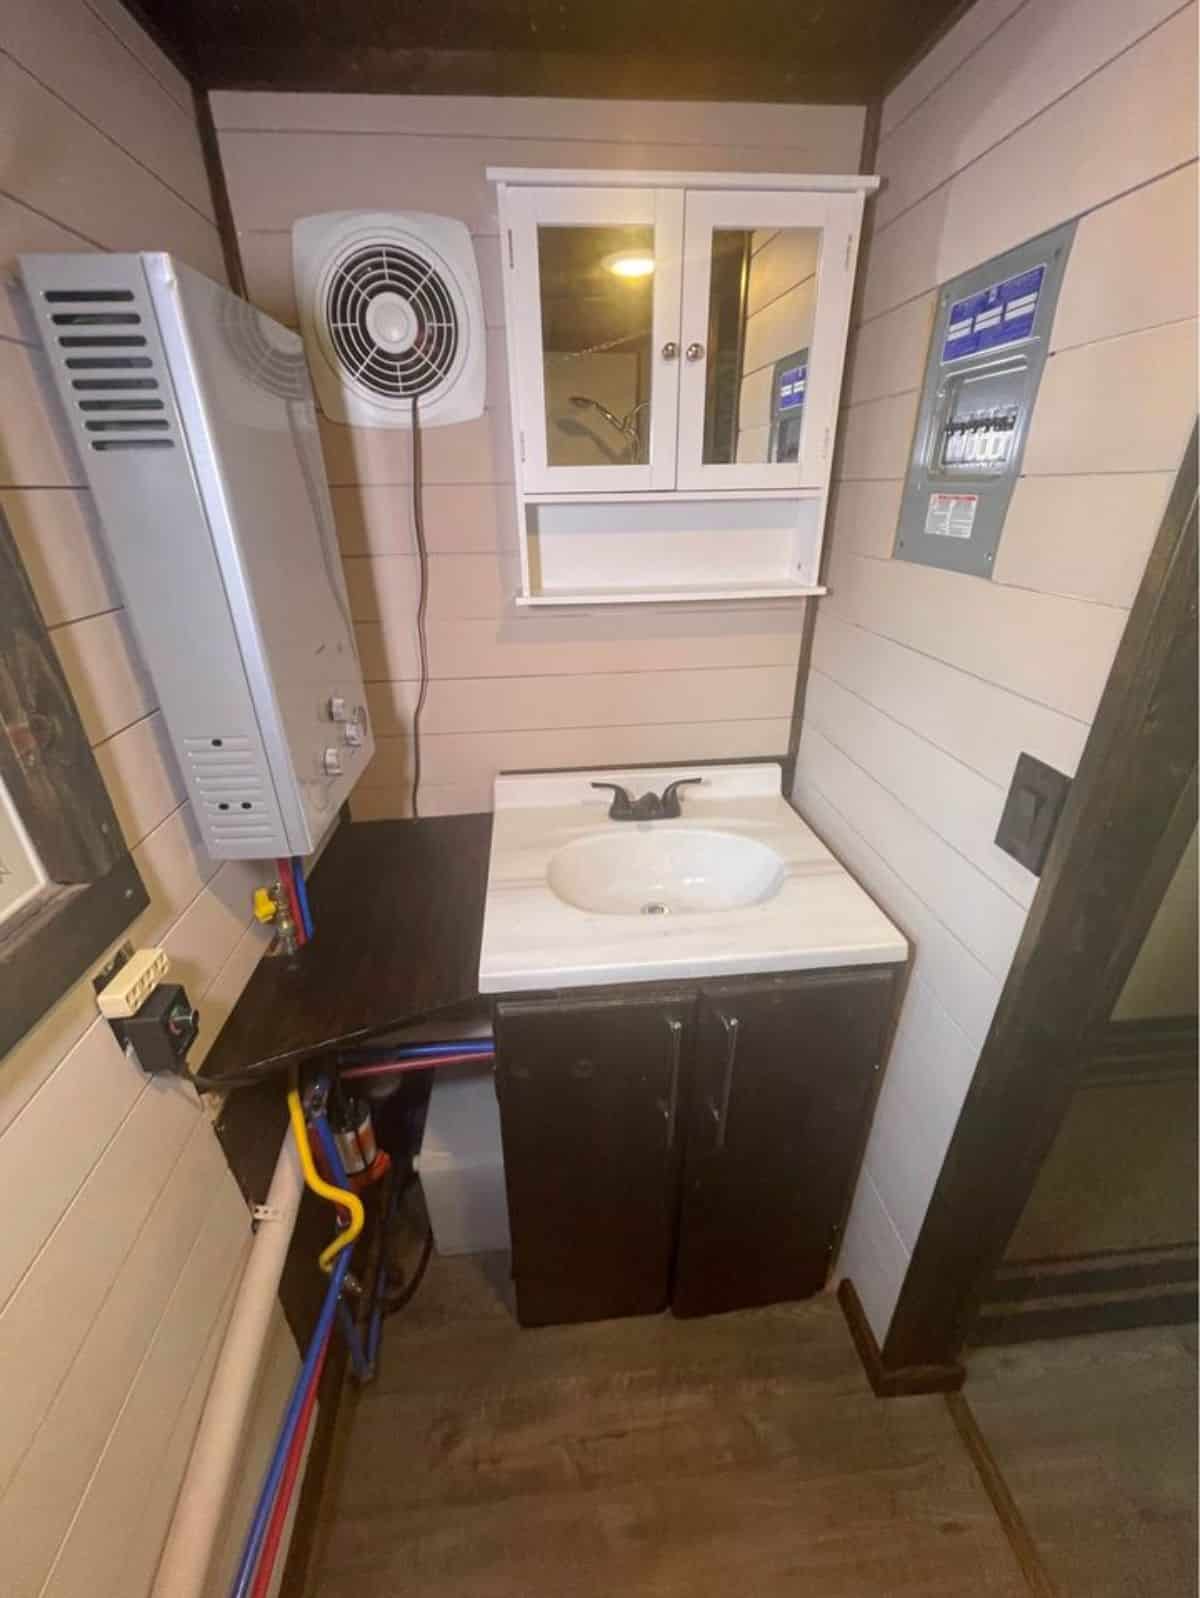 bathroom of one bedroom tiny home has all the standard fittings and a bath tub